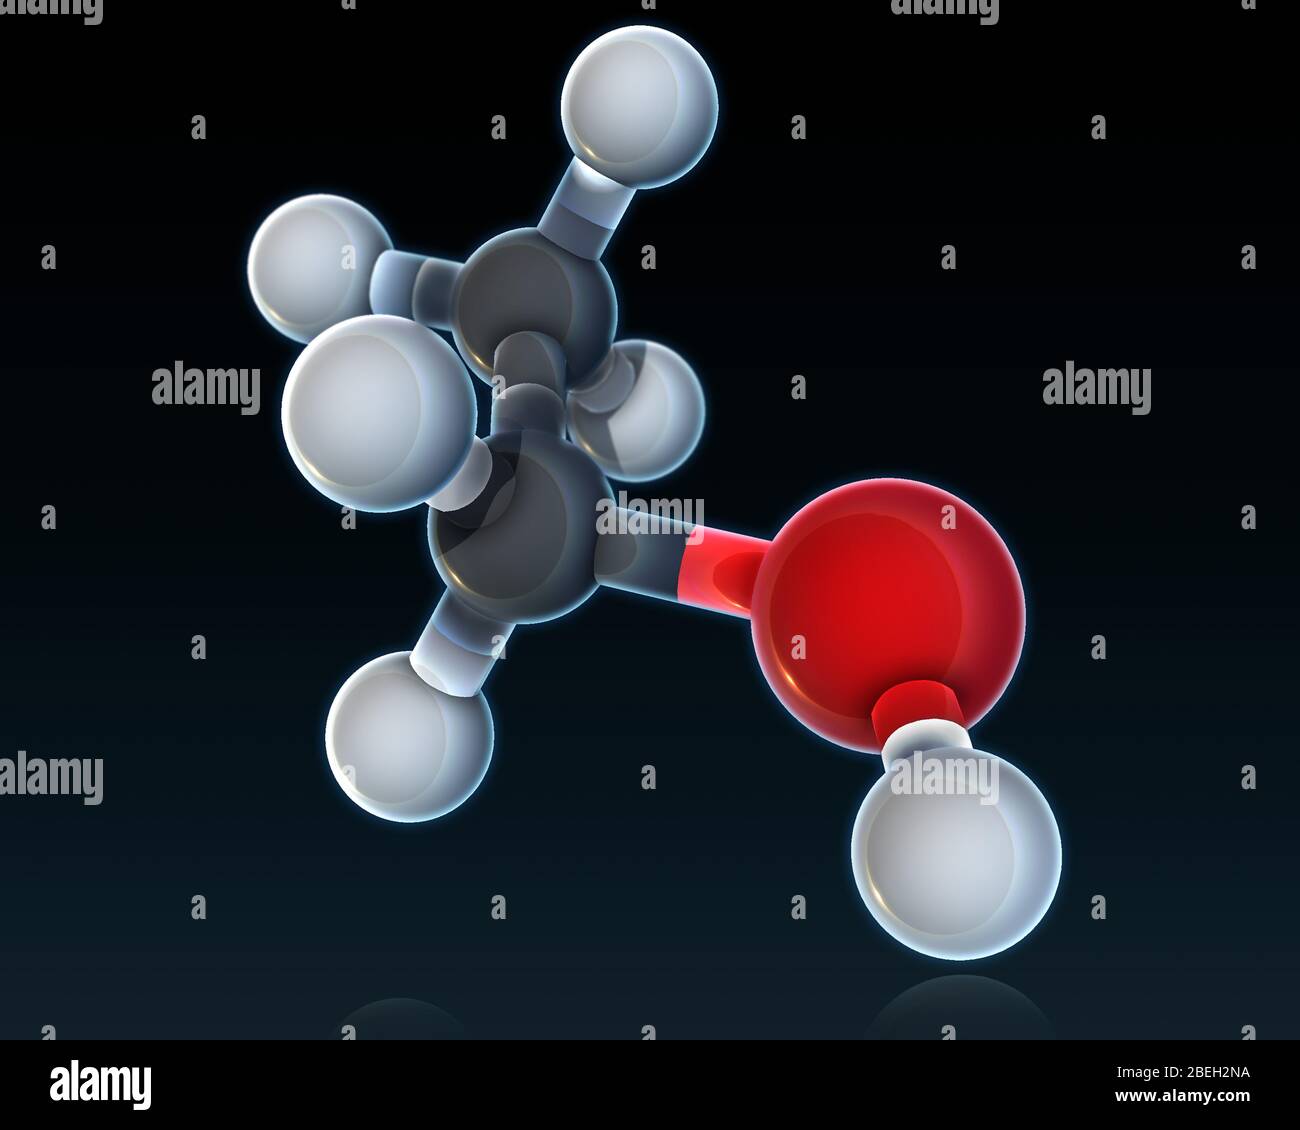 A molecular model of ethanol, a volatile, flammable, colorless liquid found in alcoholic beverages, fuel, thermometers and solvents.  Simply referred to by many as just 'alcohol,' ethanol is responsible for the psychoactive effects of intoxication from alcoholic beverages.  Atoms are colored light gray (hydrogen), dark gray (carbon) and red (oxygen). Stock Photo